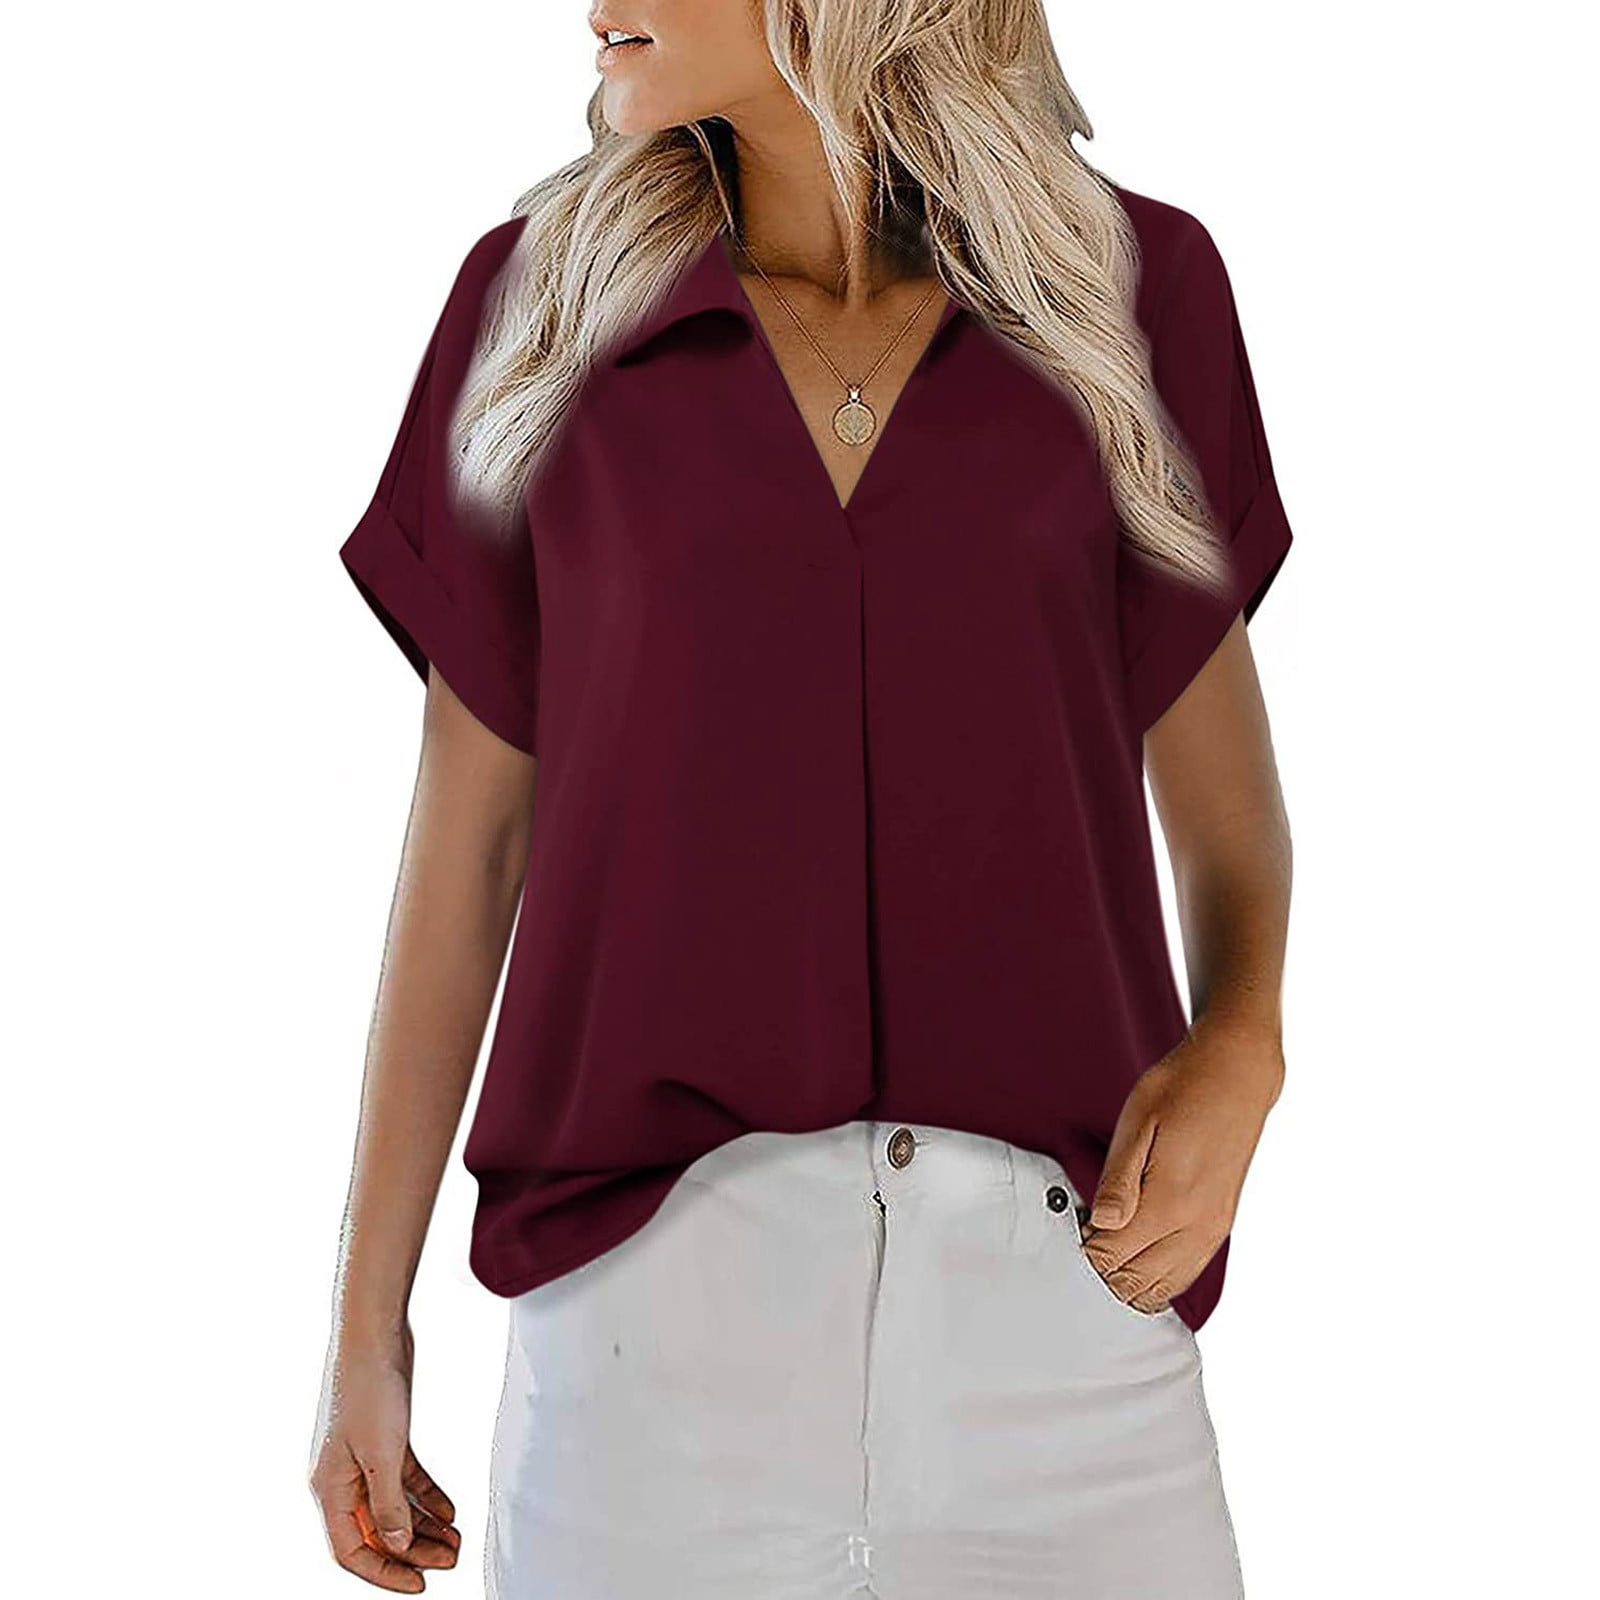 Zpanxa Womens Summer Tops Clearance V- Neck Solid Color Short Sleeve Lapel  Tops Womens Workout Tops Shirts Wine L 